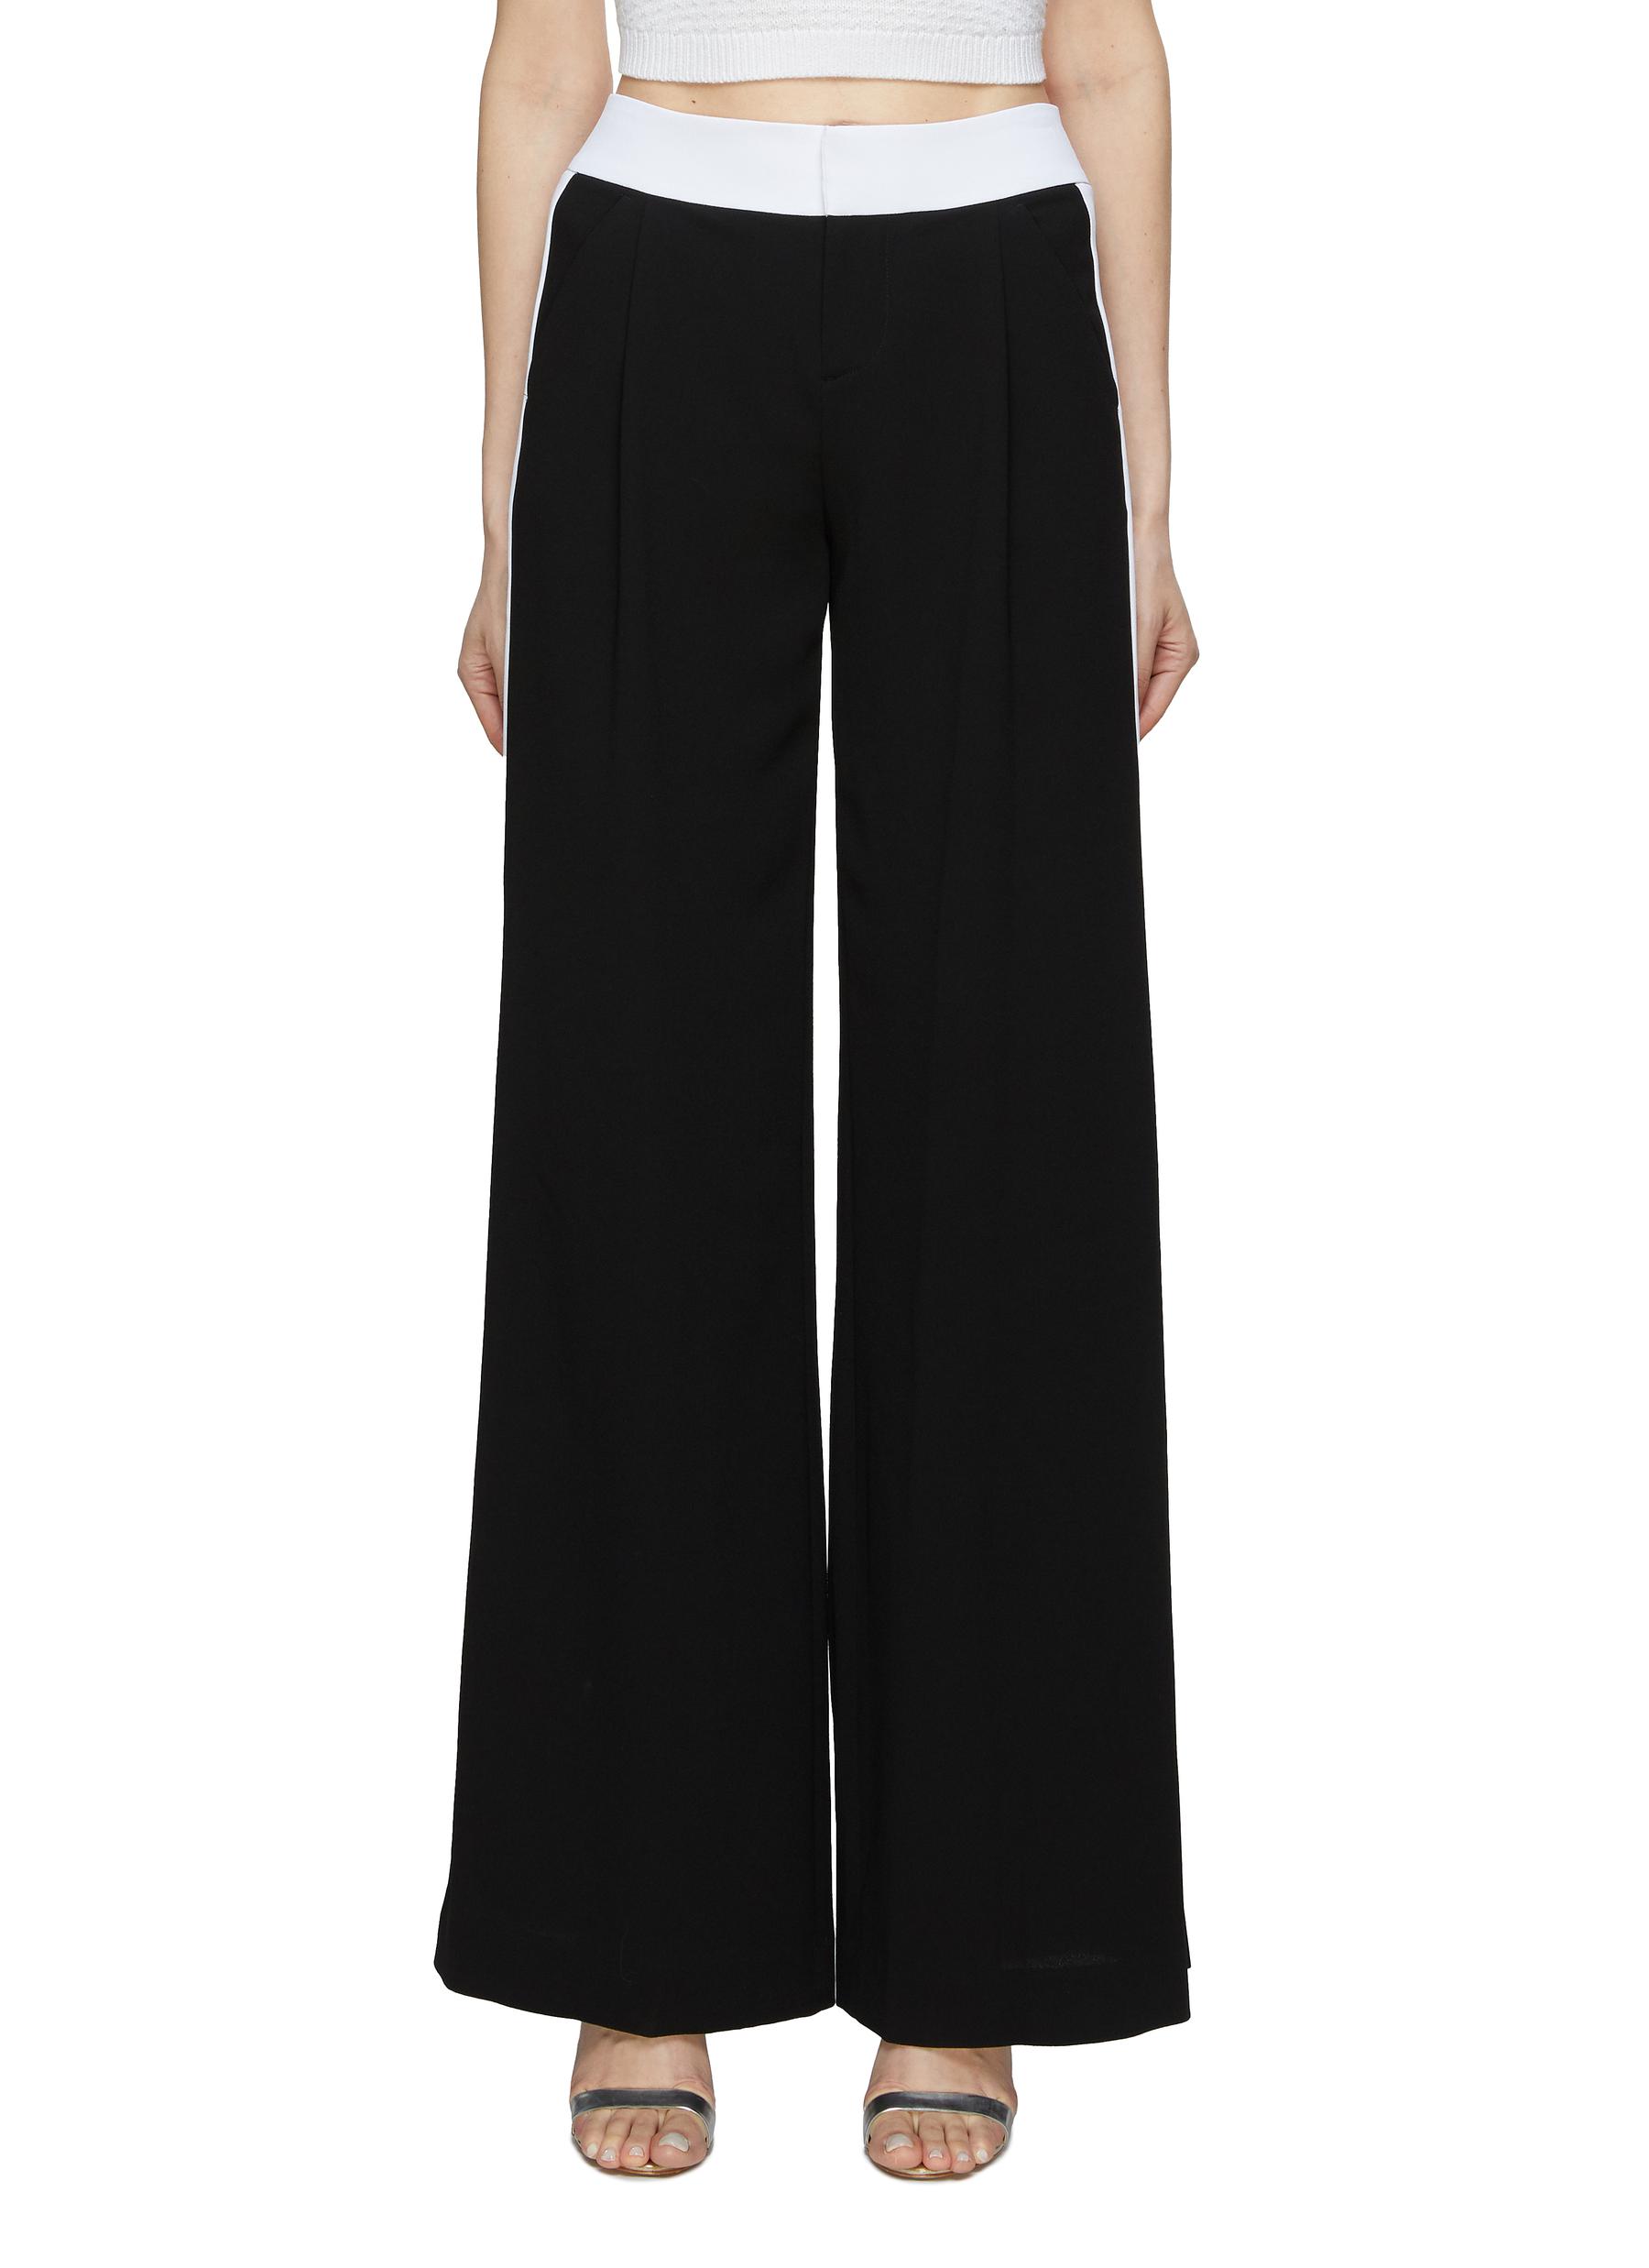 ALICE AND OLIVIA ‘ERIC' CONTRAST SIDE STRIPE WIDE LEG PANTS